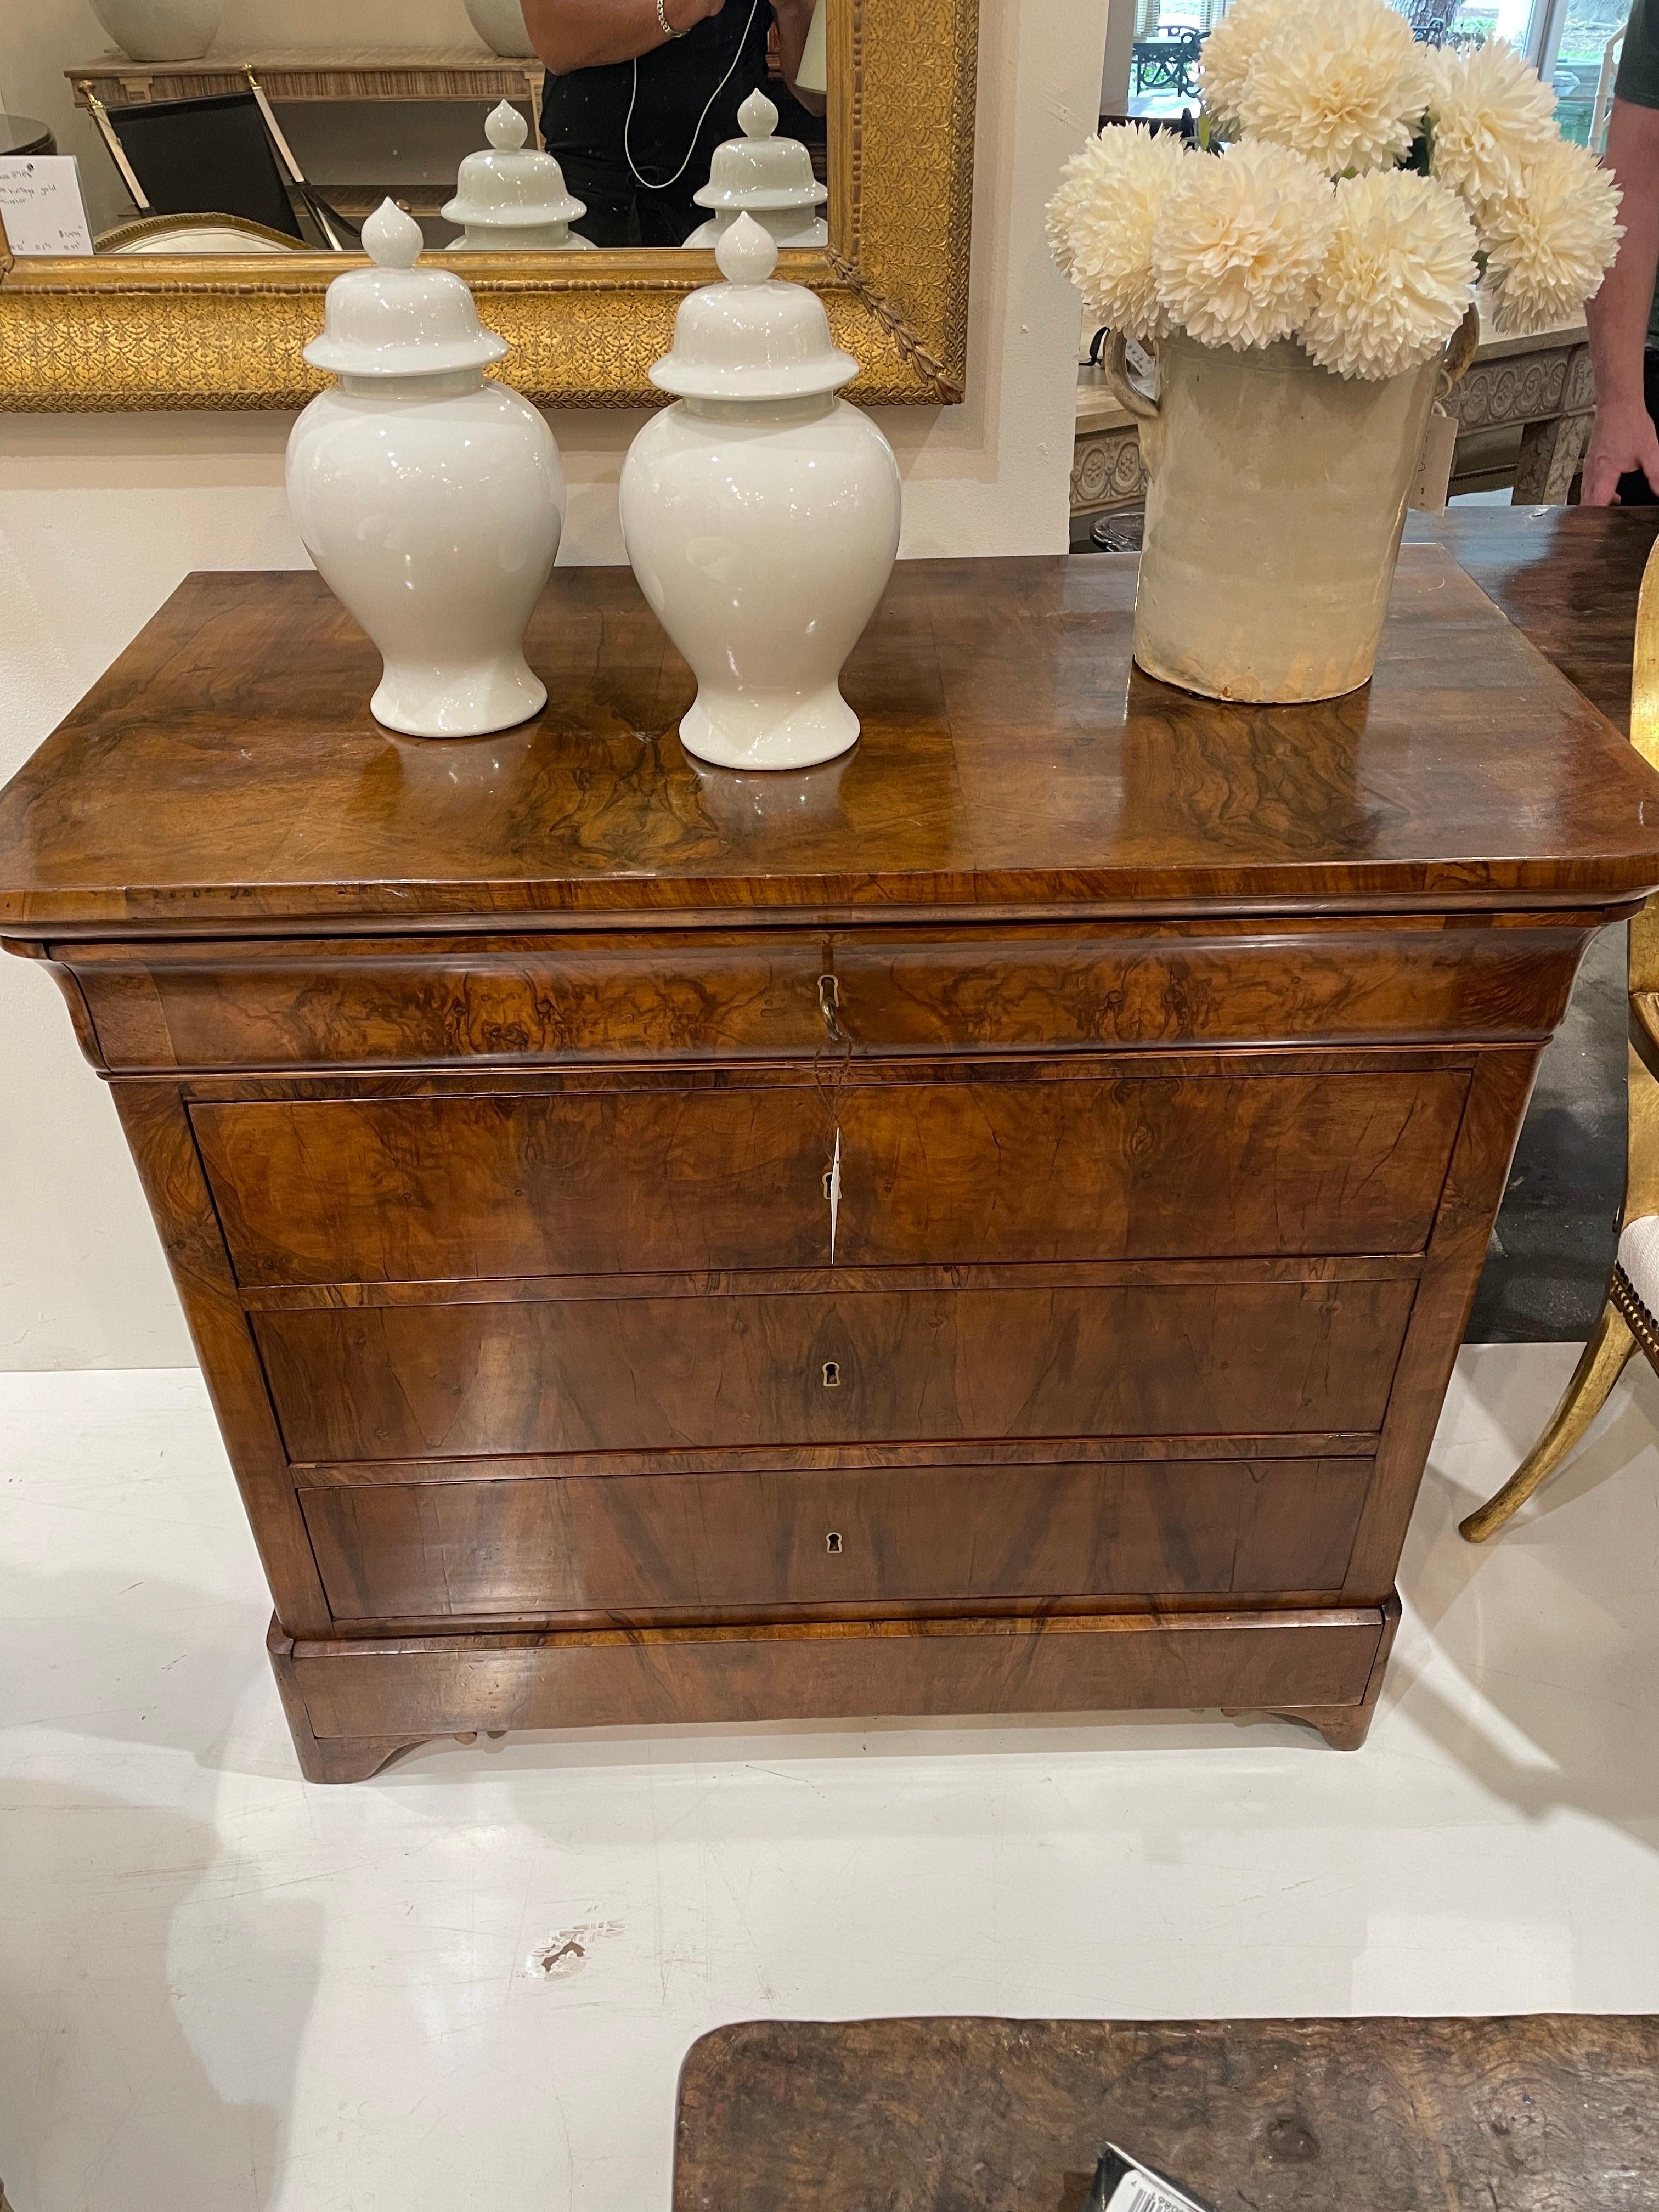 
Crafted in the 19th century, the Louis Philippe commode exudes timeless elegance and refined craftsmanship. This exquisite piece of French furniture epitomizes the neoclassical style of the era, characterized by clean lines, understated